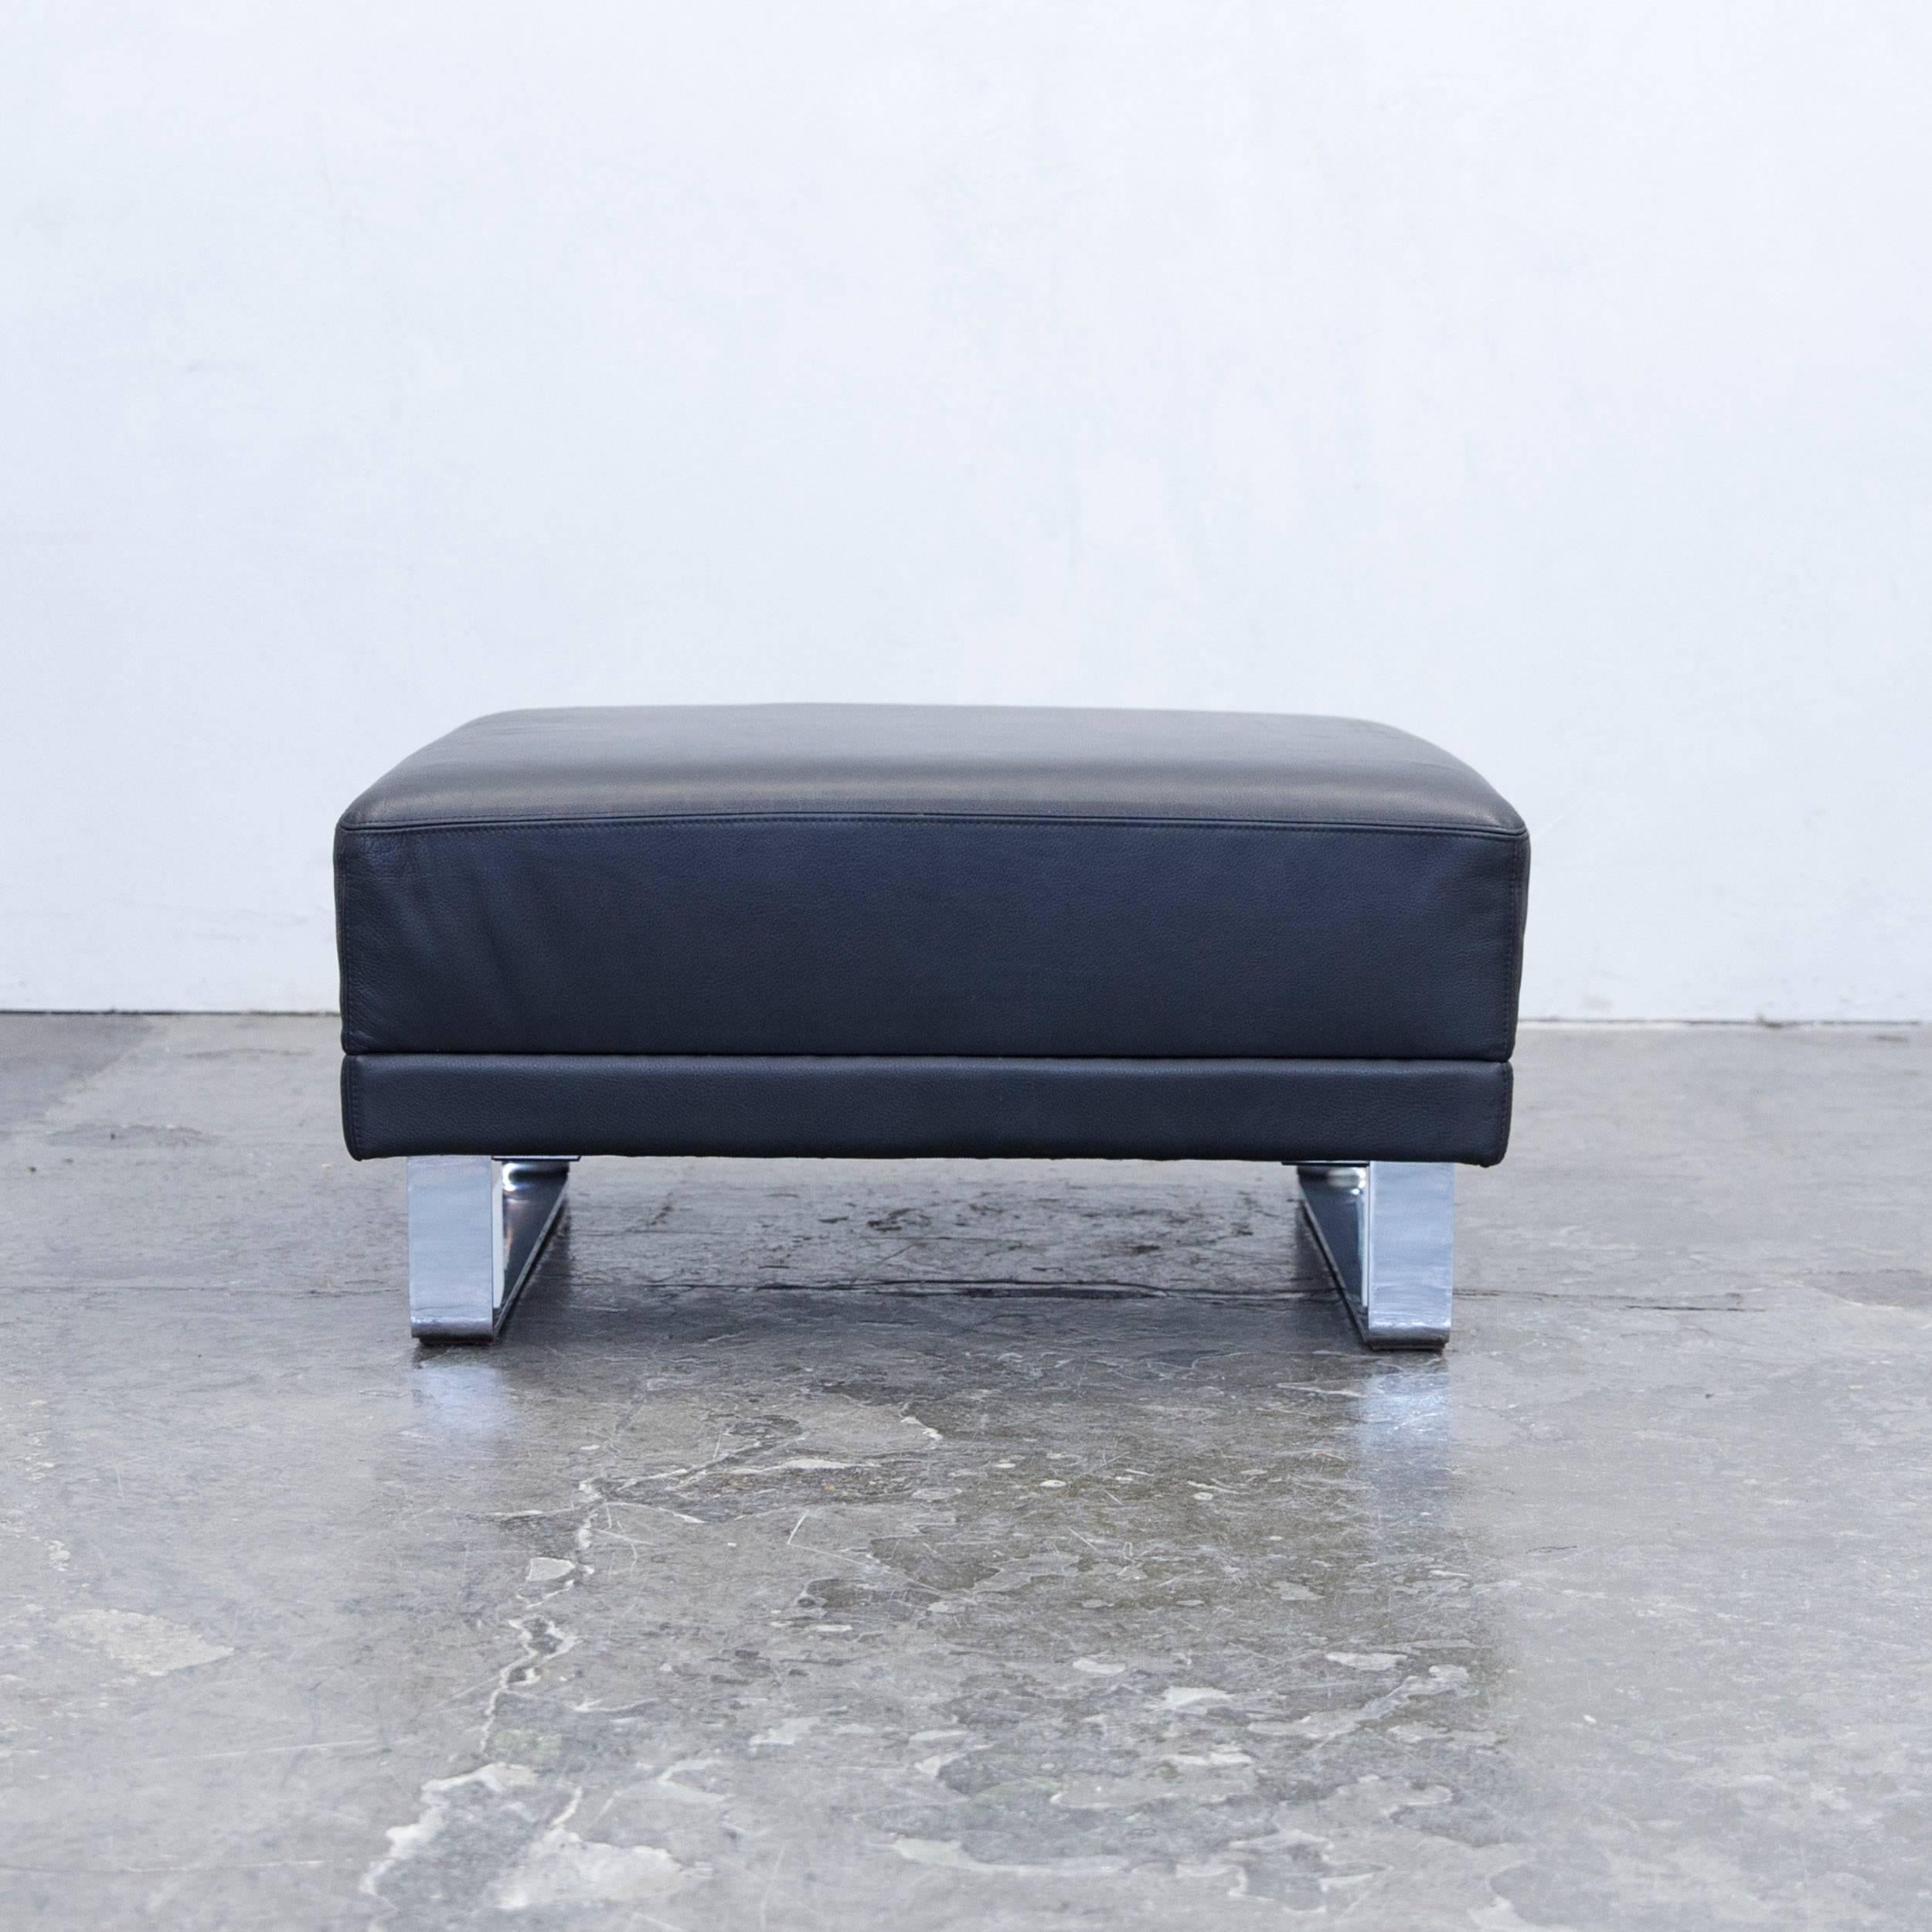 Black colored original Brühl Alba designer leather footstool in a minimalistic and modern design, made for pure comfort and flexible placing.